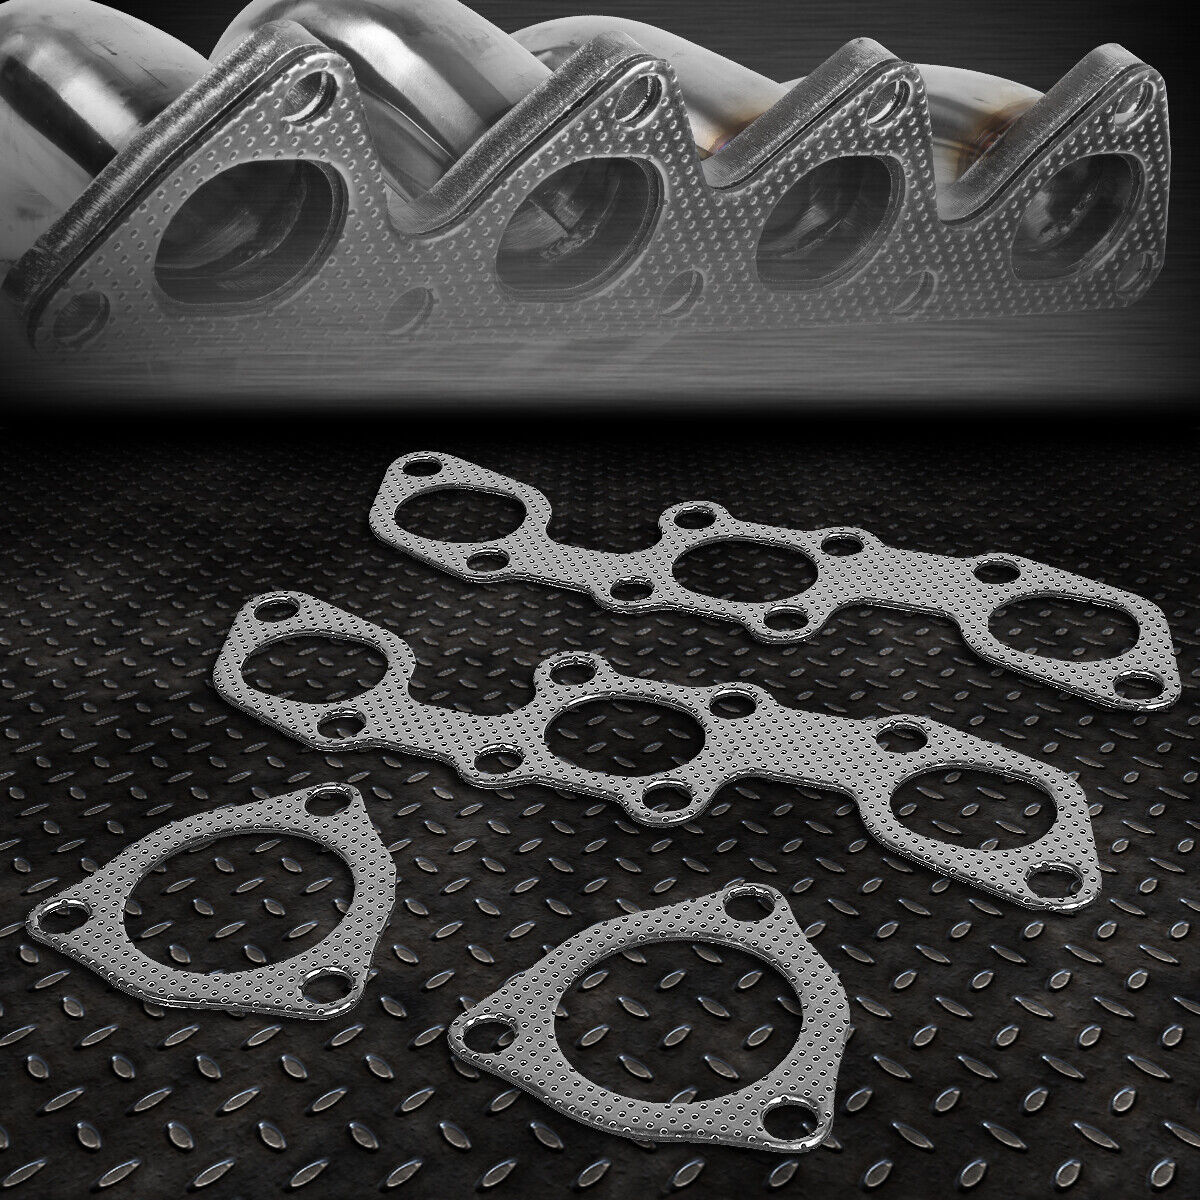 FOR 90-96 NISSAN 300ZX 3.0L ENGINE NON TURBO EXHAUST MANIFOLD HEADER GASKET SET